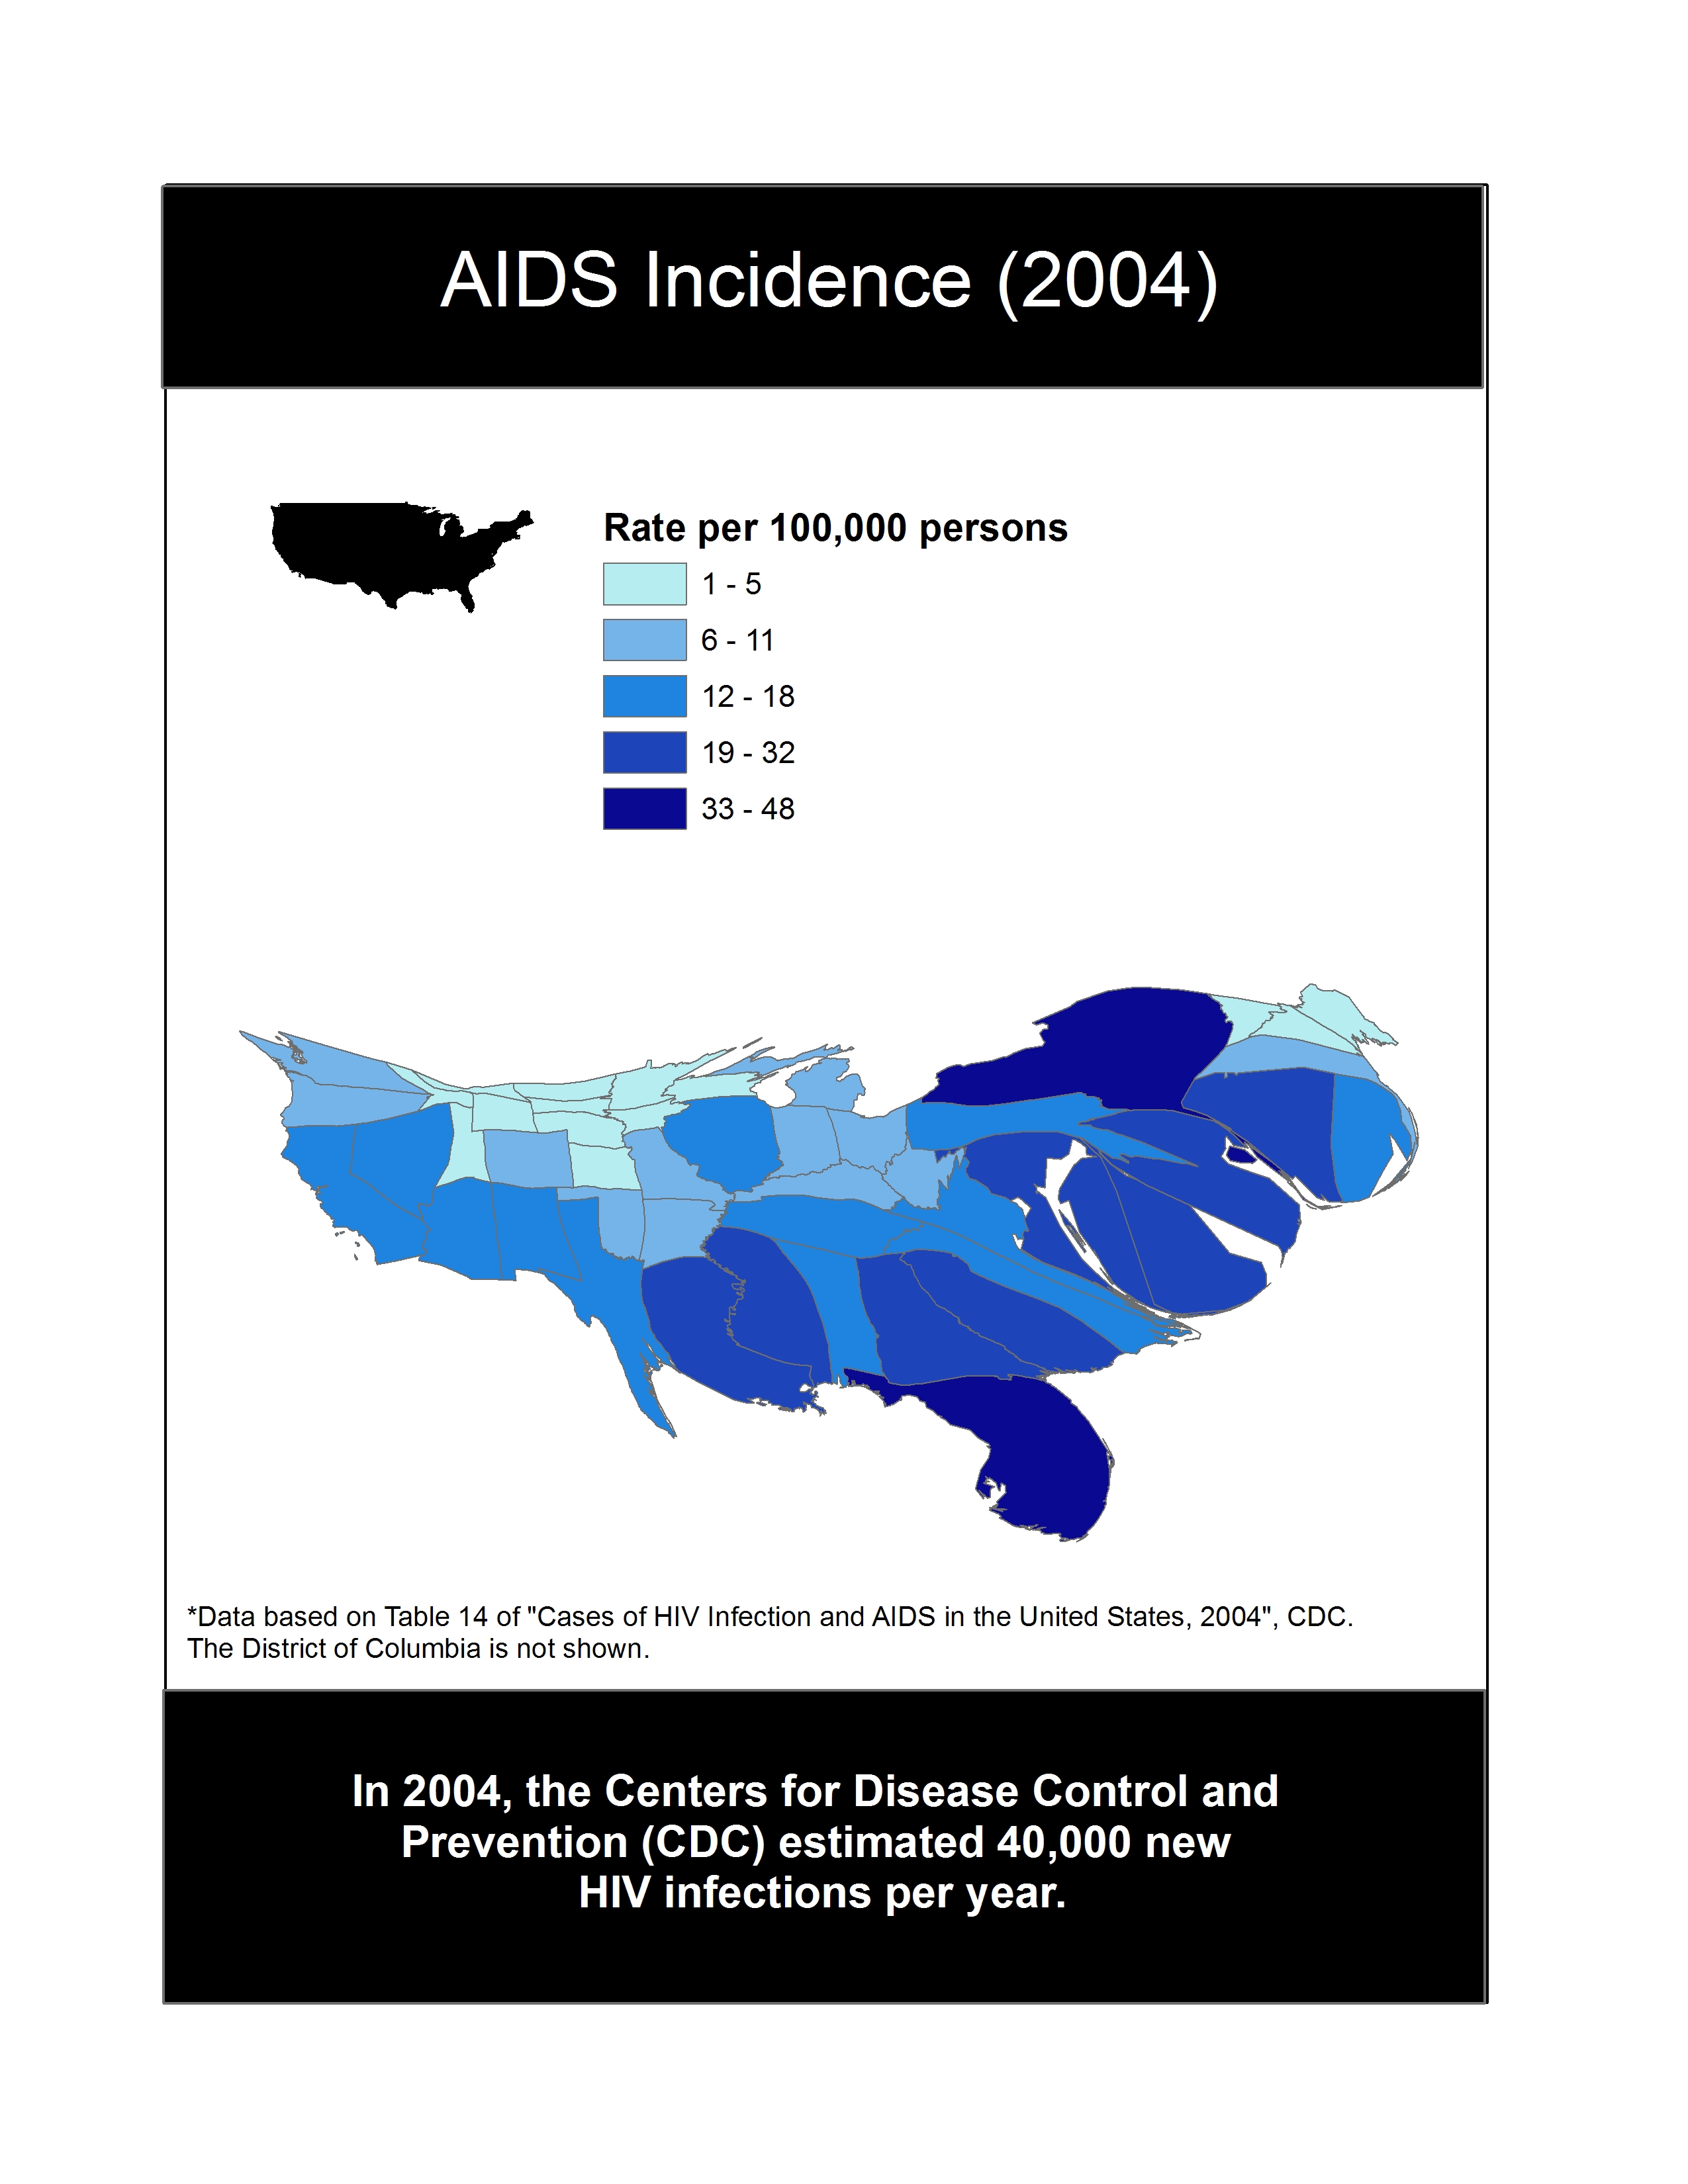 AIDS Incidence 2004 Map Image